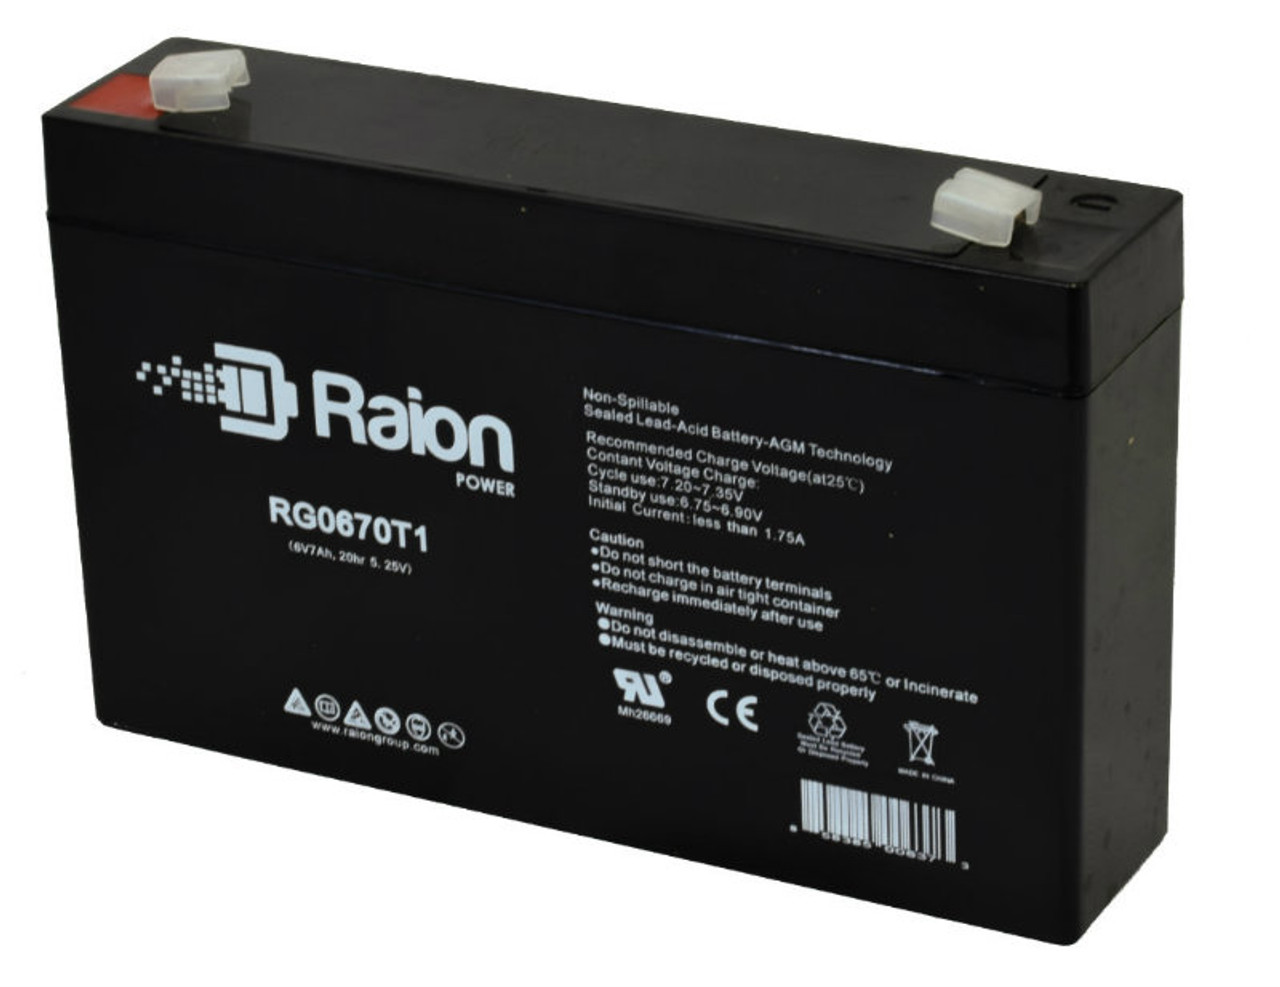 Raion Power RG0670T1 6V 7Ah Replacement Battery Cartridge for McGaw Accu Pro Infusion Pump Medical Equipment